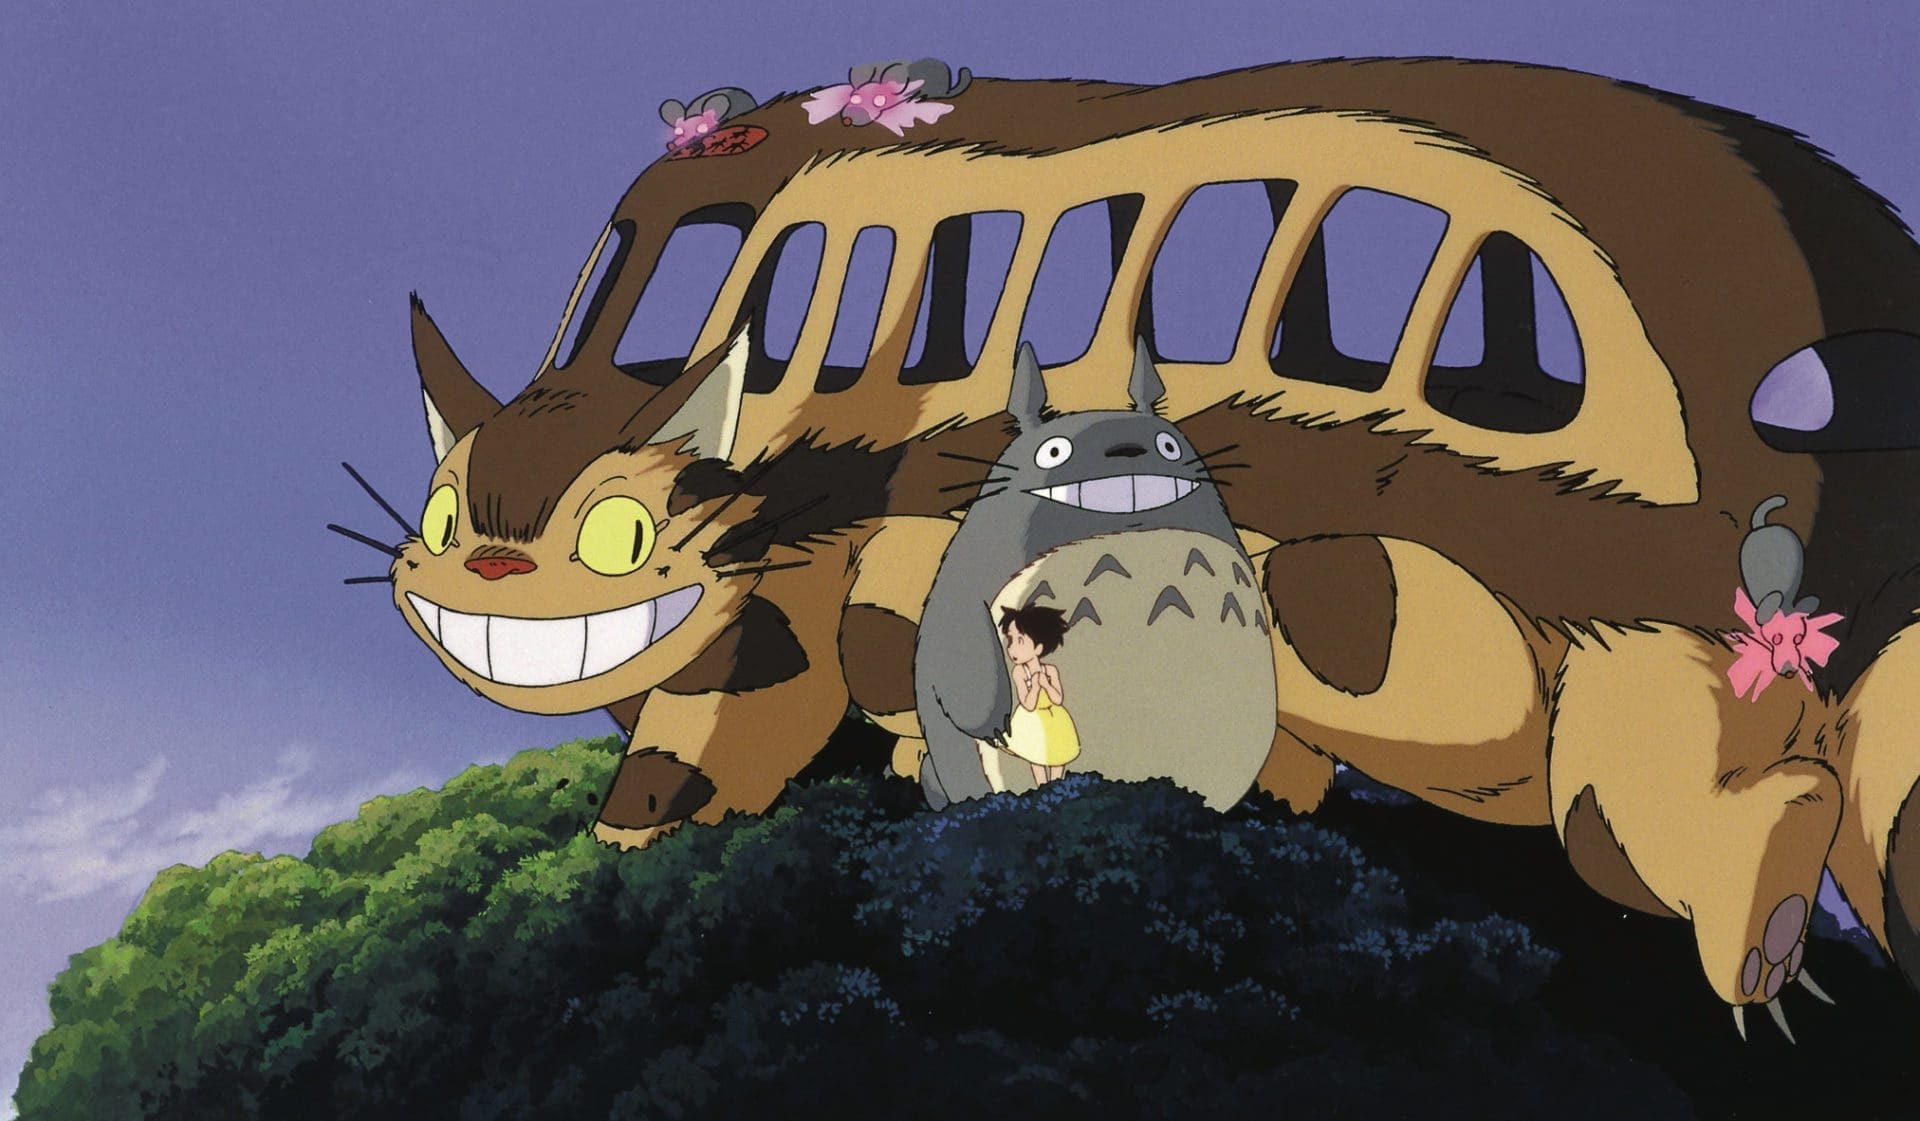 anime news, castle in the sky, Fathom Events, ghibli fest, gkids, howls moving castle, kikis delivery service, movie news, mune guardian of the moon, My Neighbor Totoro, nausicaa of the valley of the wind, spirited away, studio ghibli